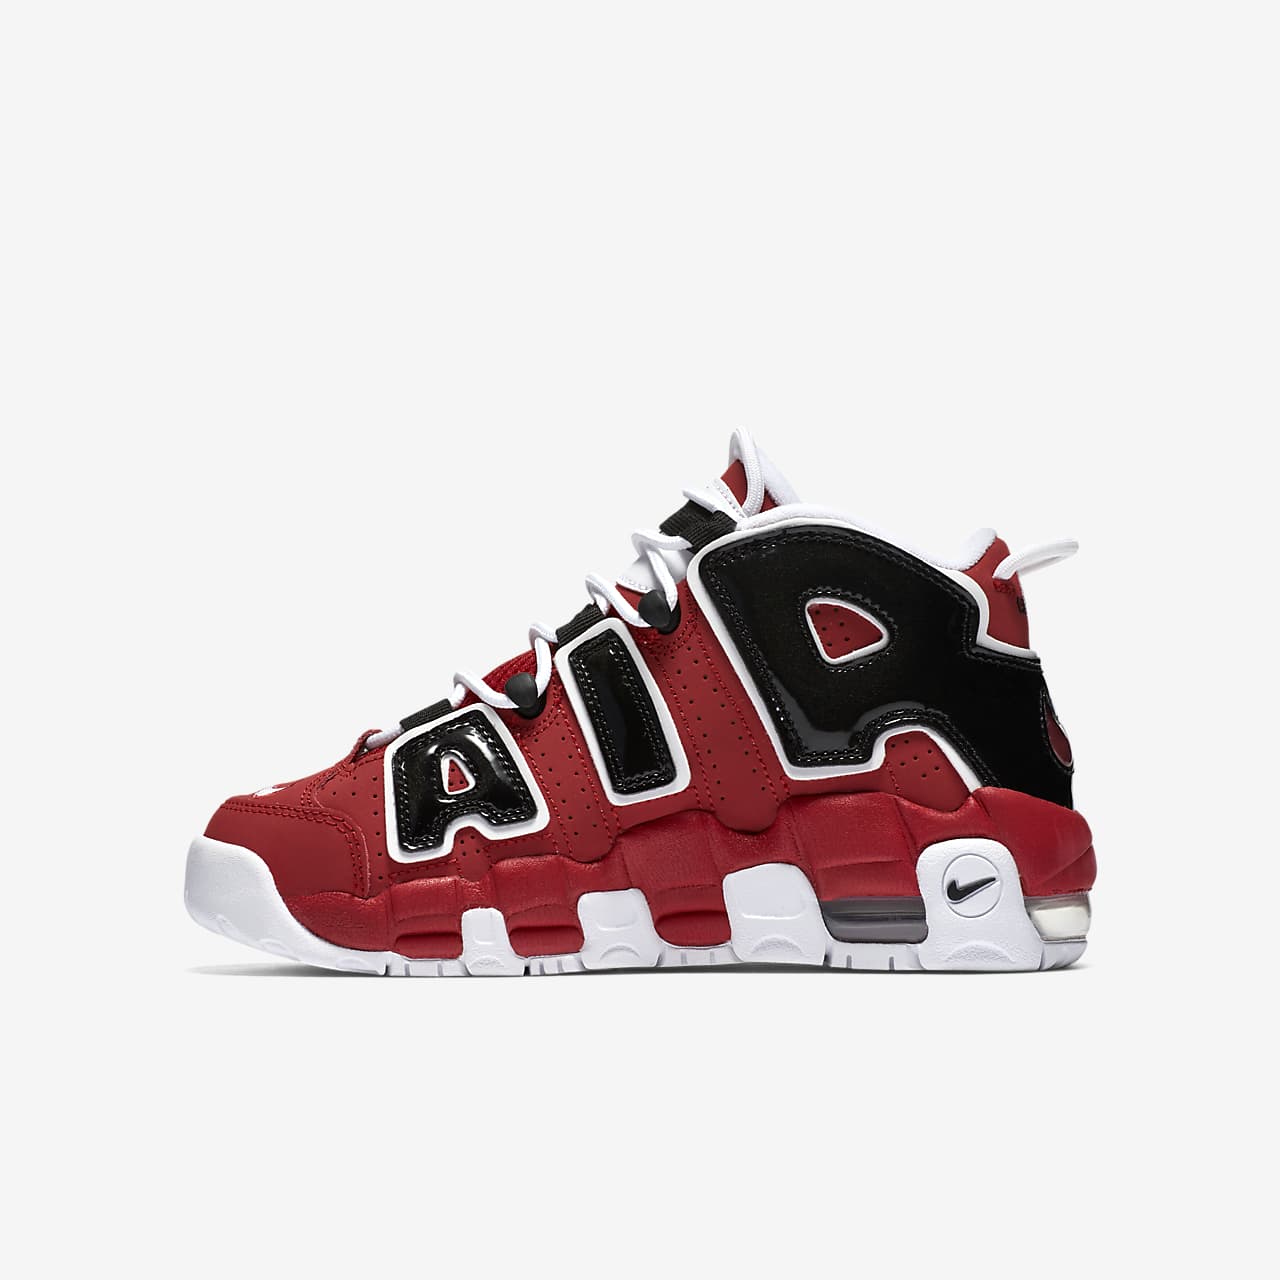 uptempo shoes nike